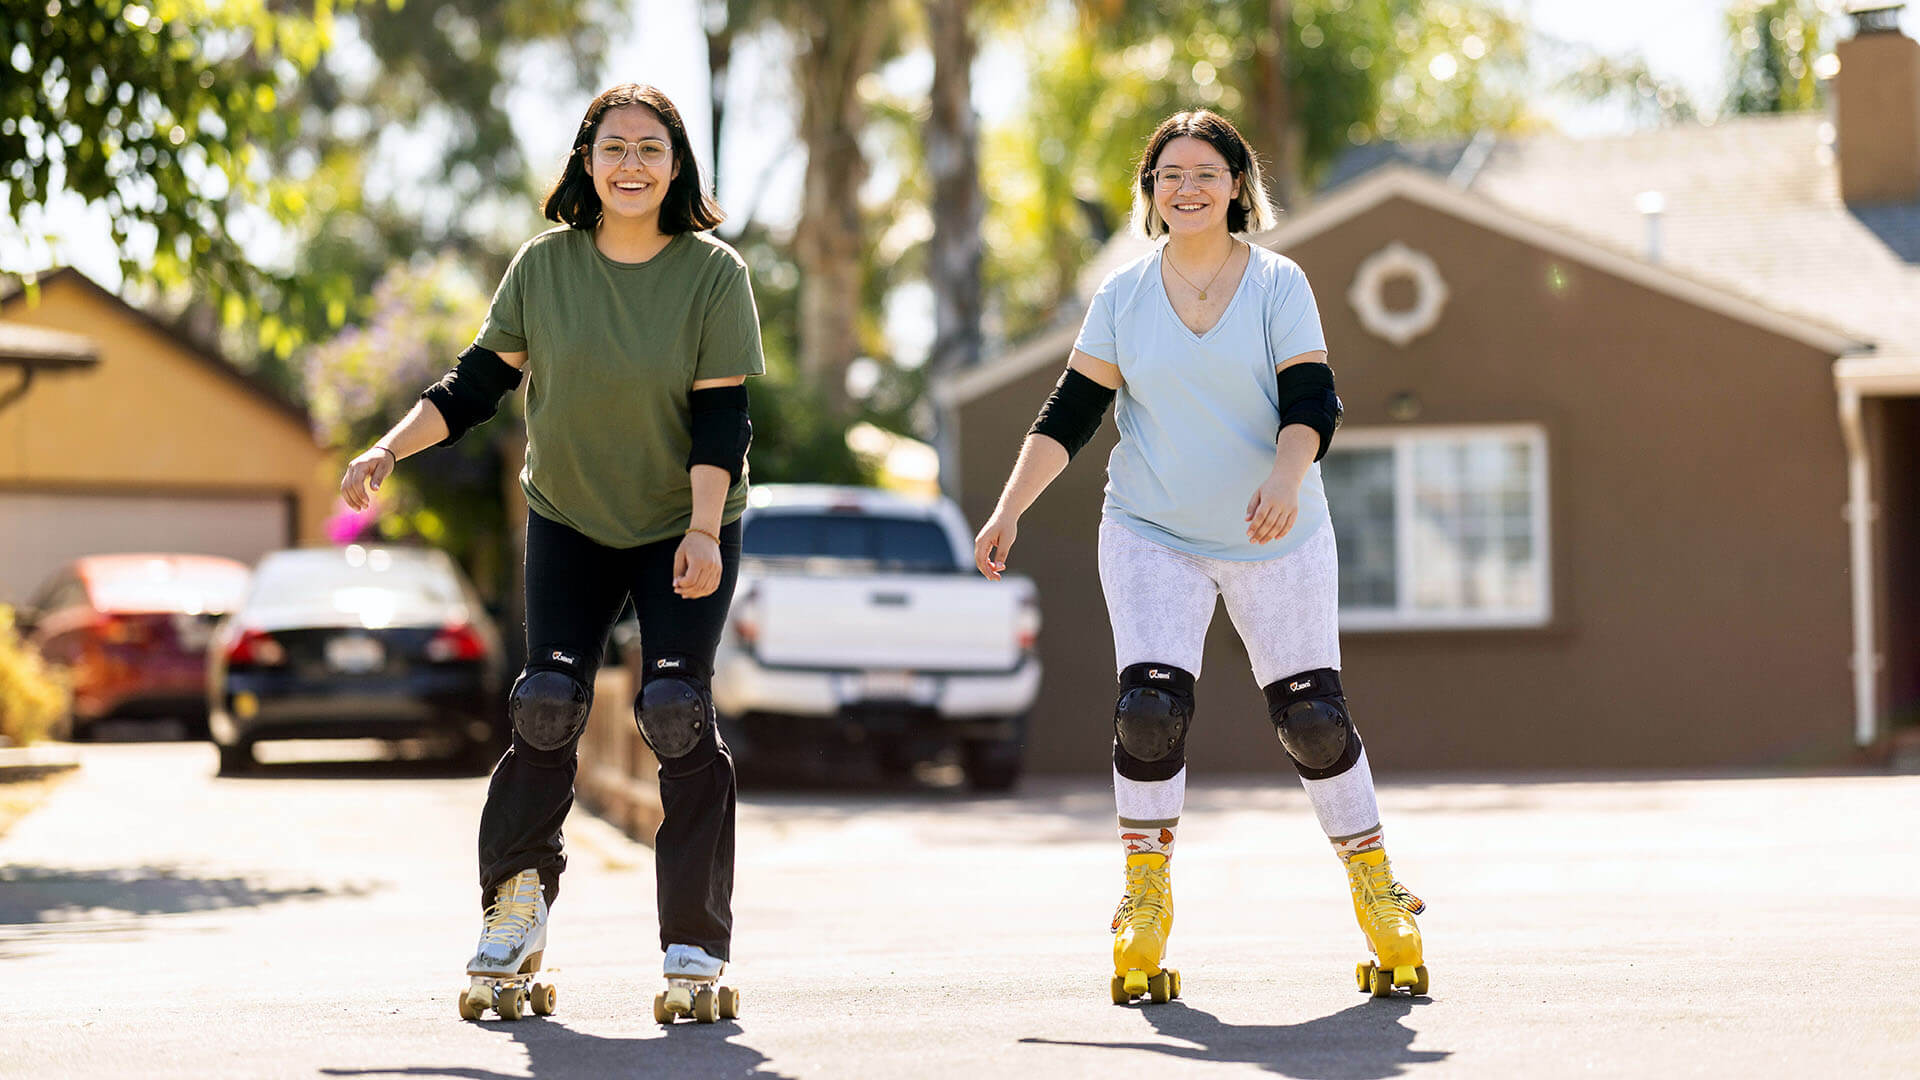 Two women smile while roller skating outside.